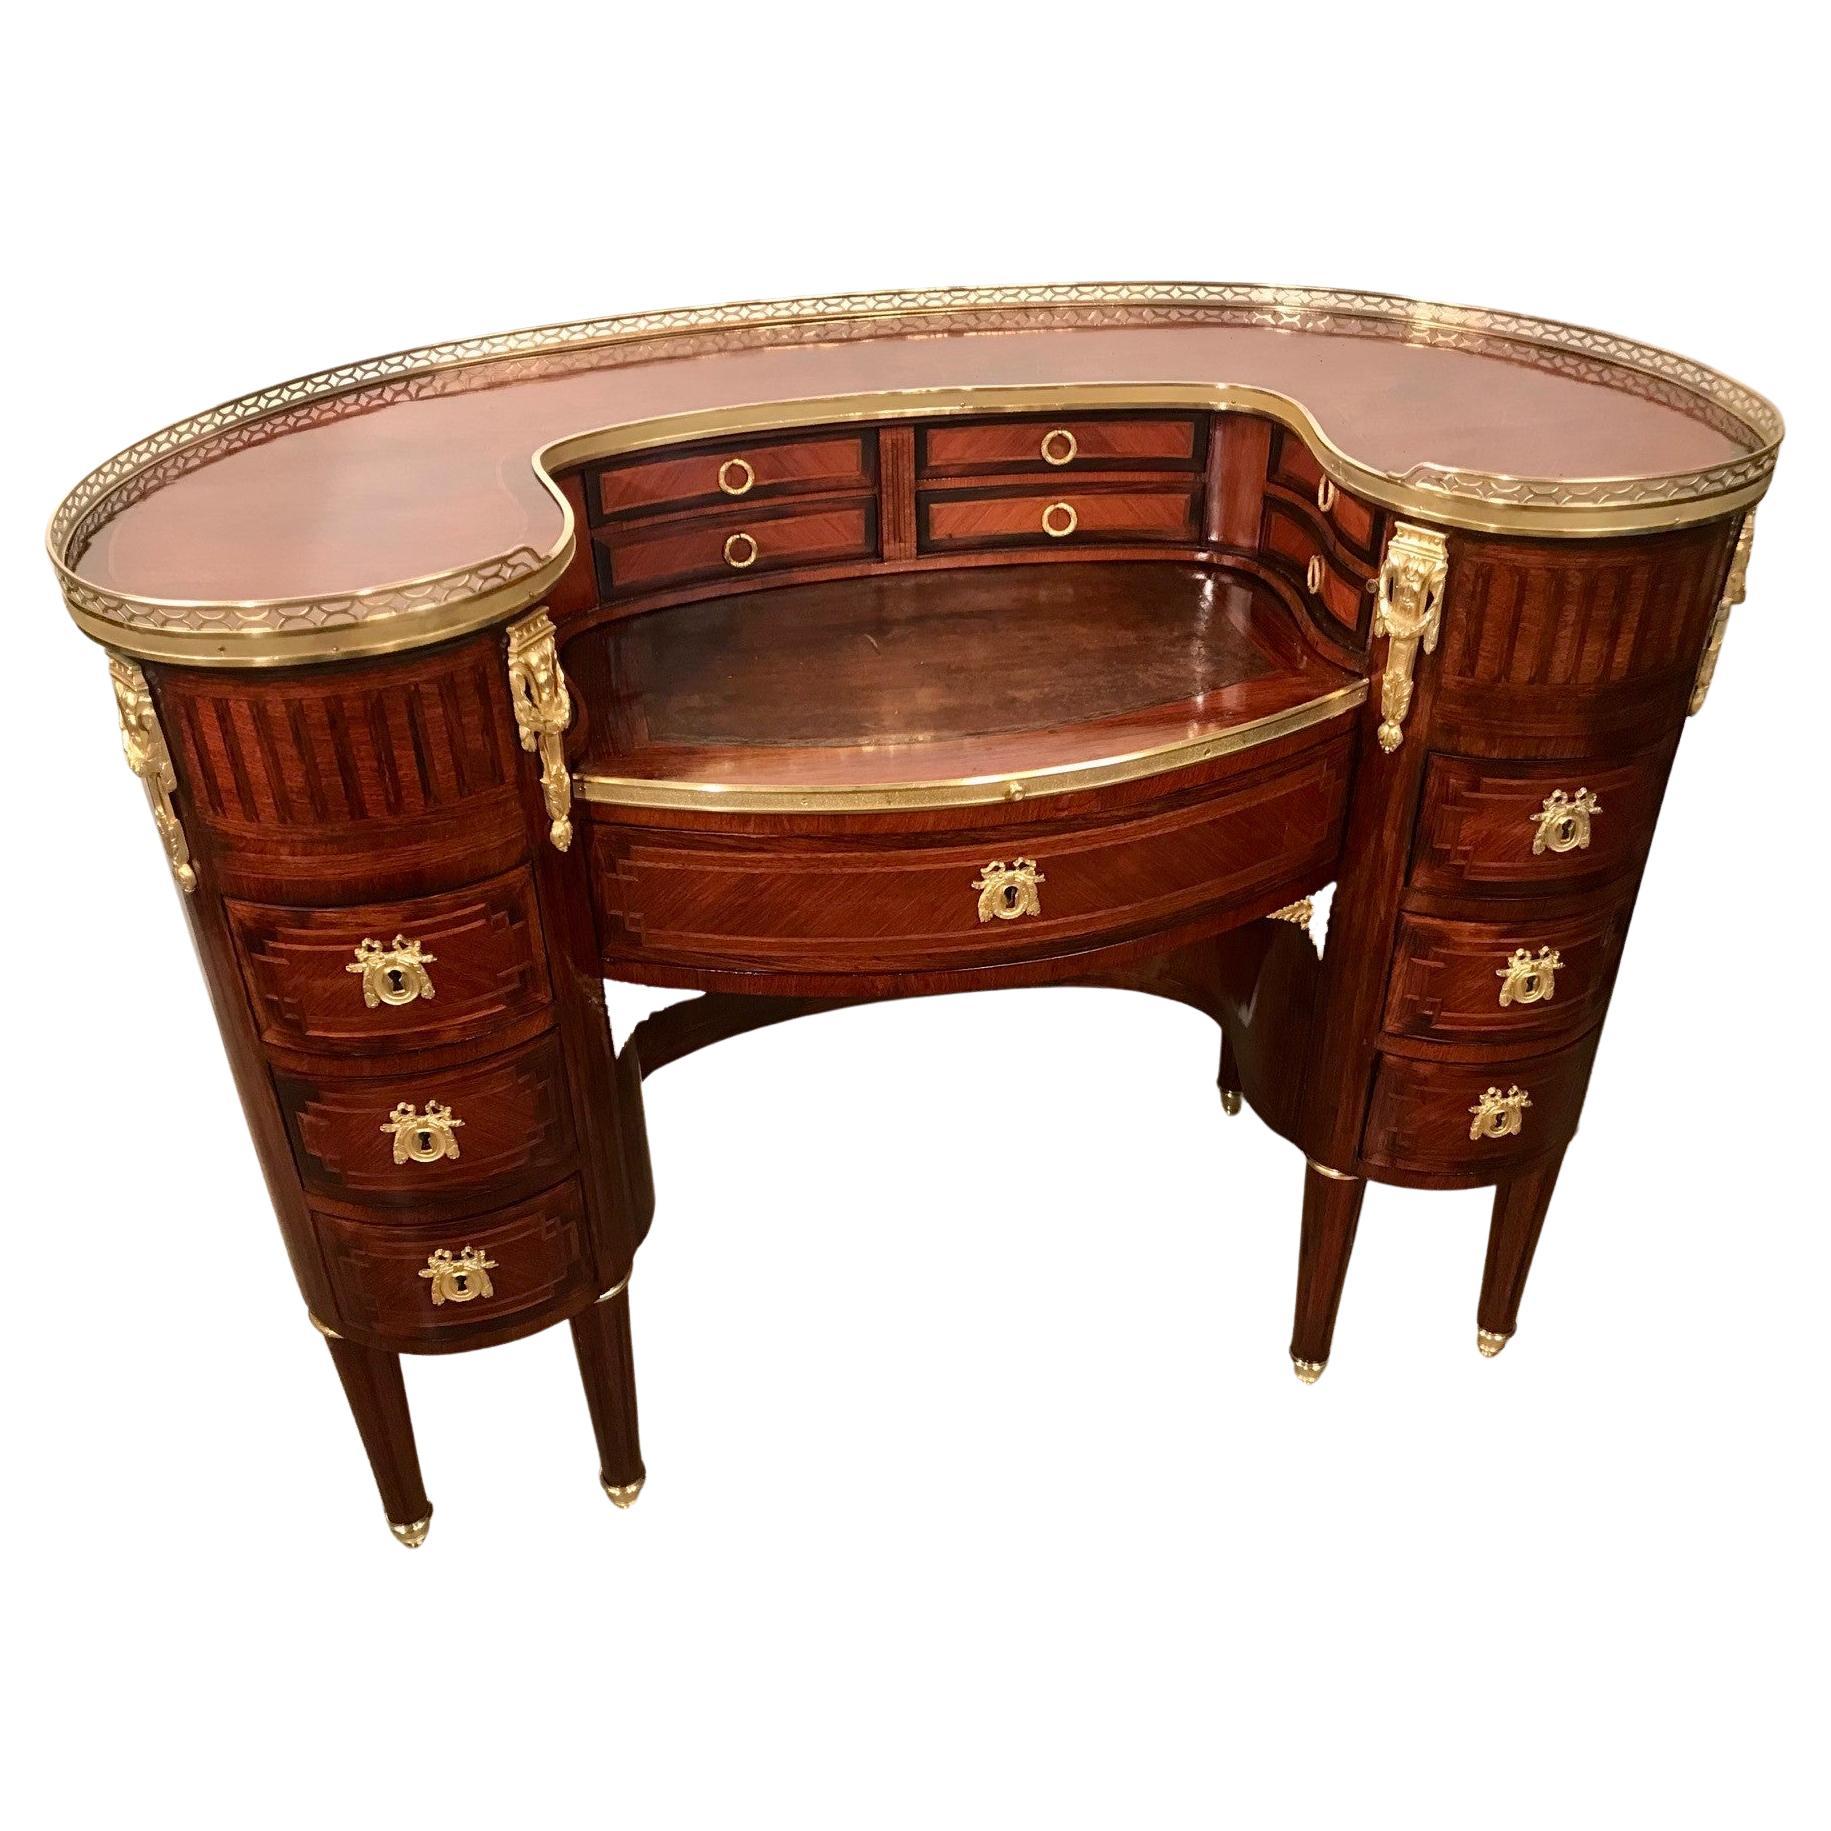 Although of kidney shape, this desk is more substantial than generally found in such a form. The top has a pierced brass gallery enclosing a fanning kingwood veneer. The leather slide-out writing surface is enclosed by a pair of tambour shutters